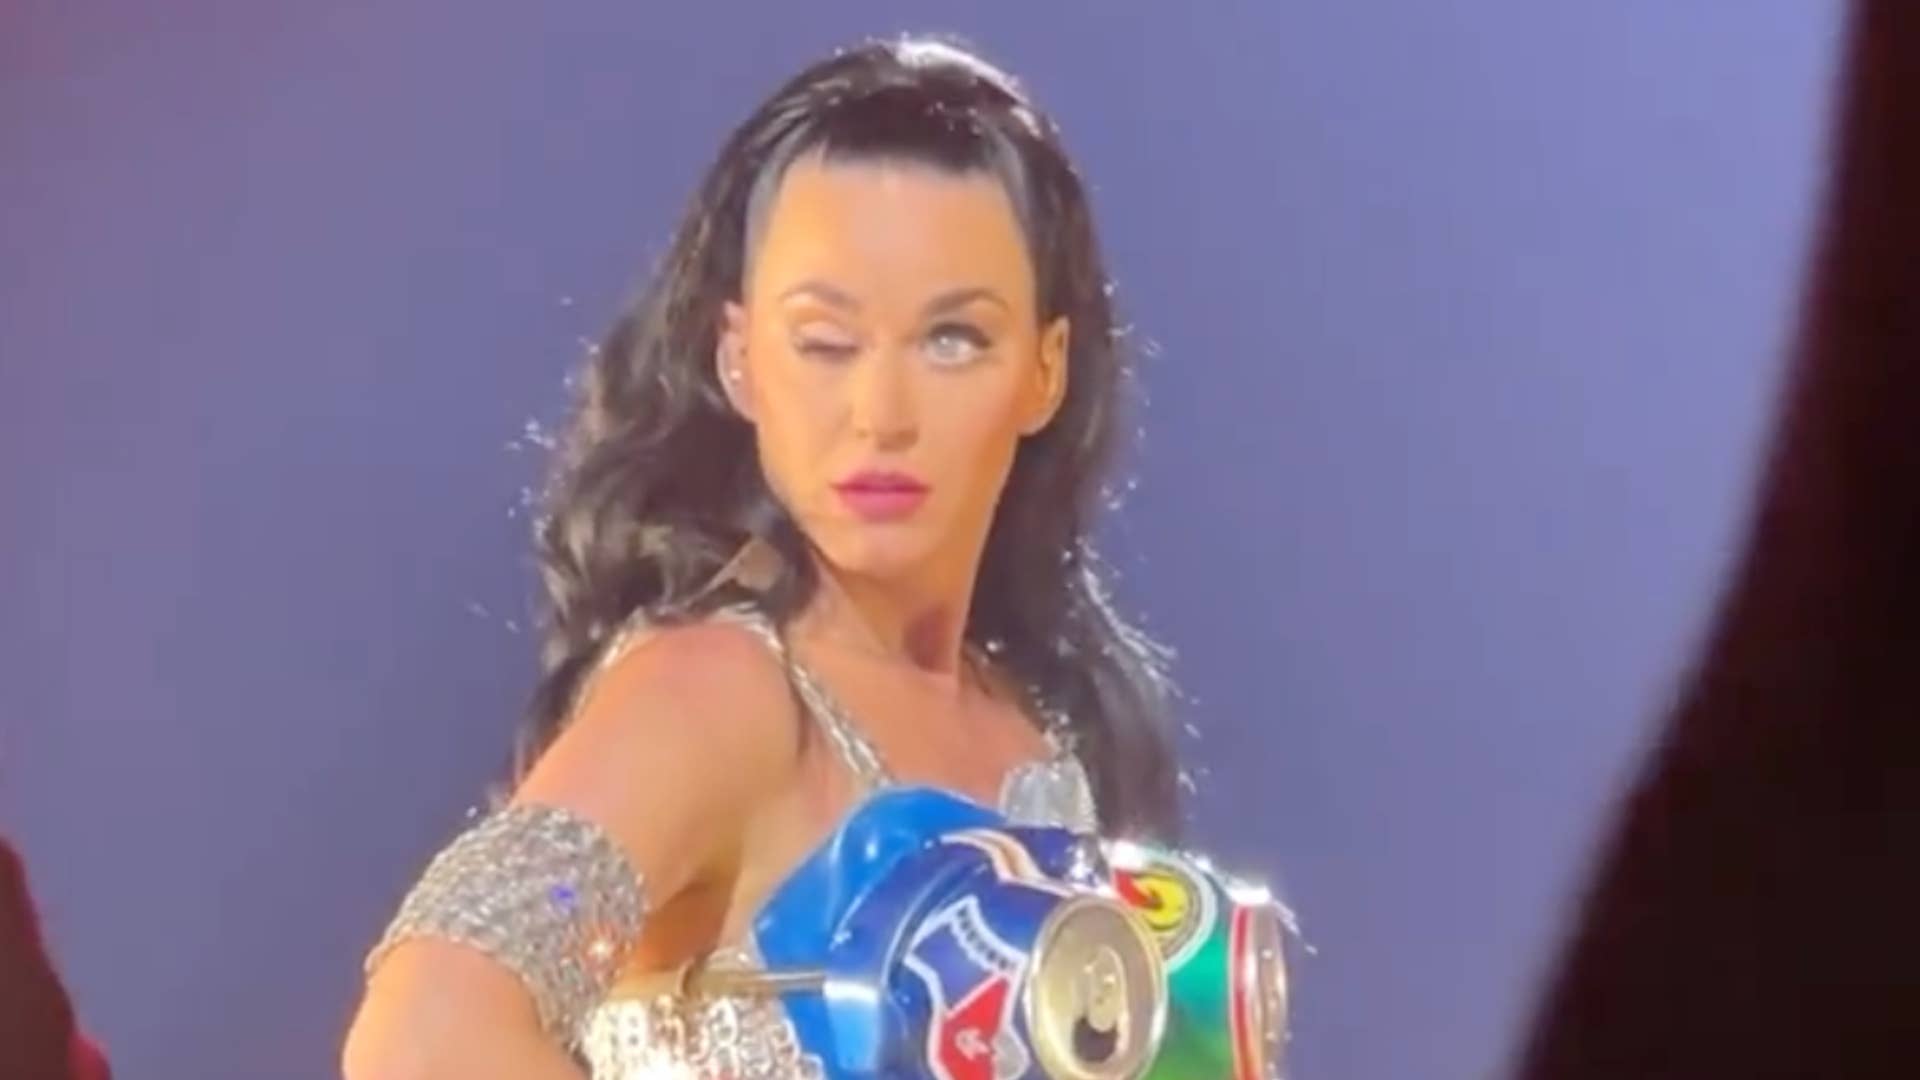 Katy Perry Just Can't Party Like She Used To